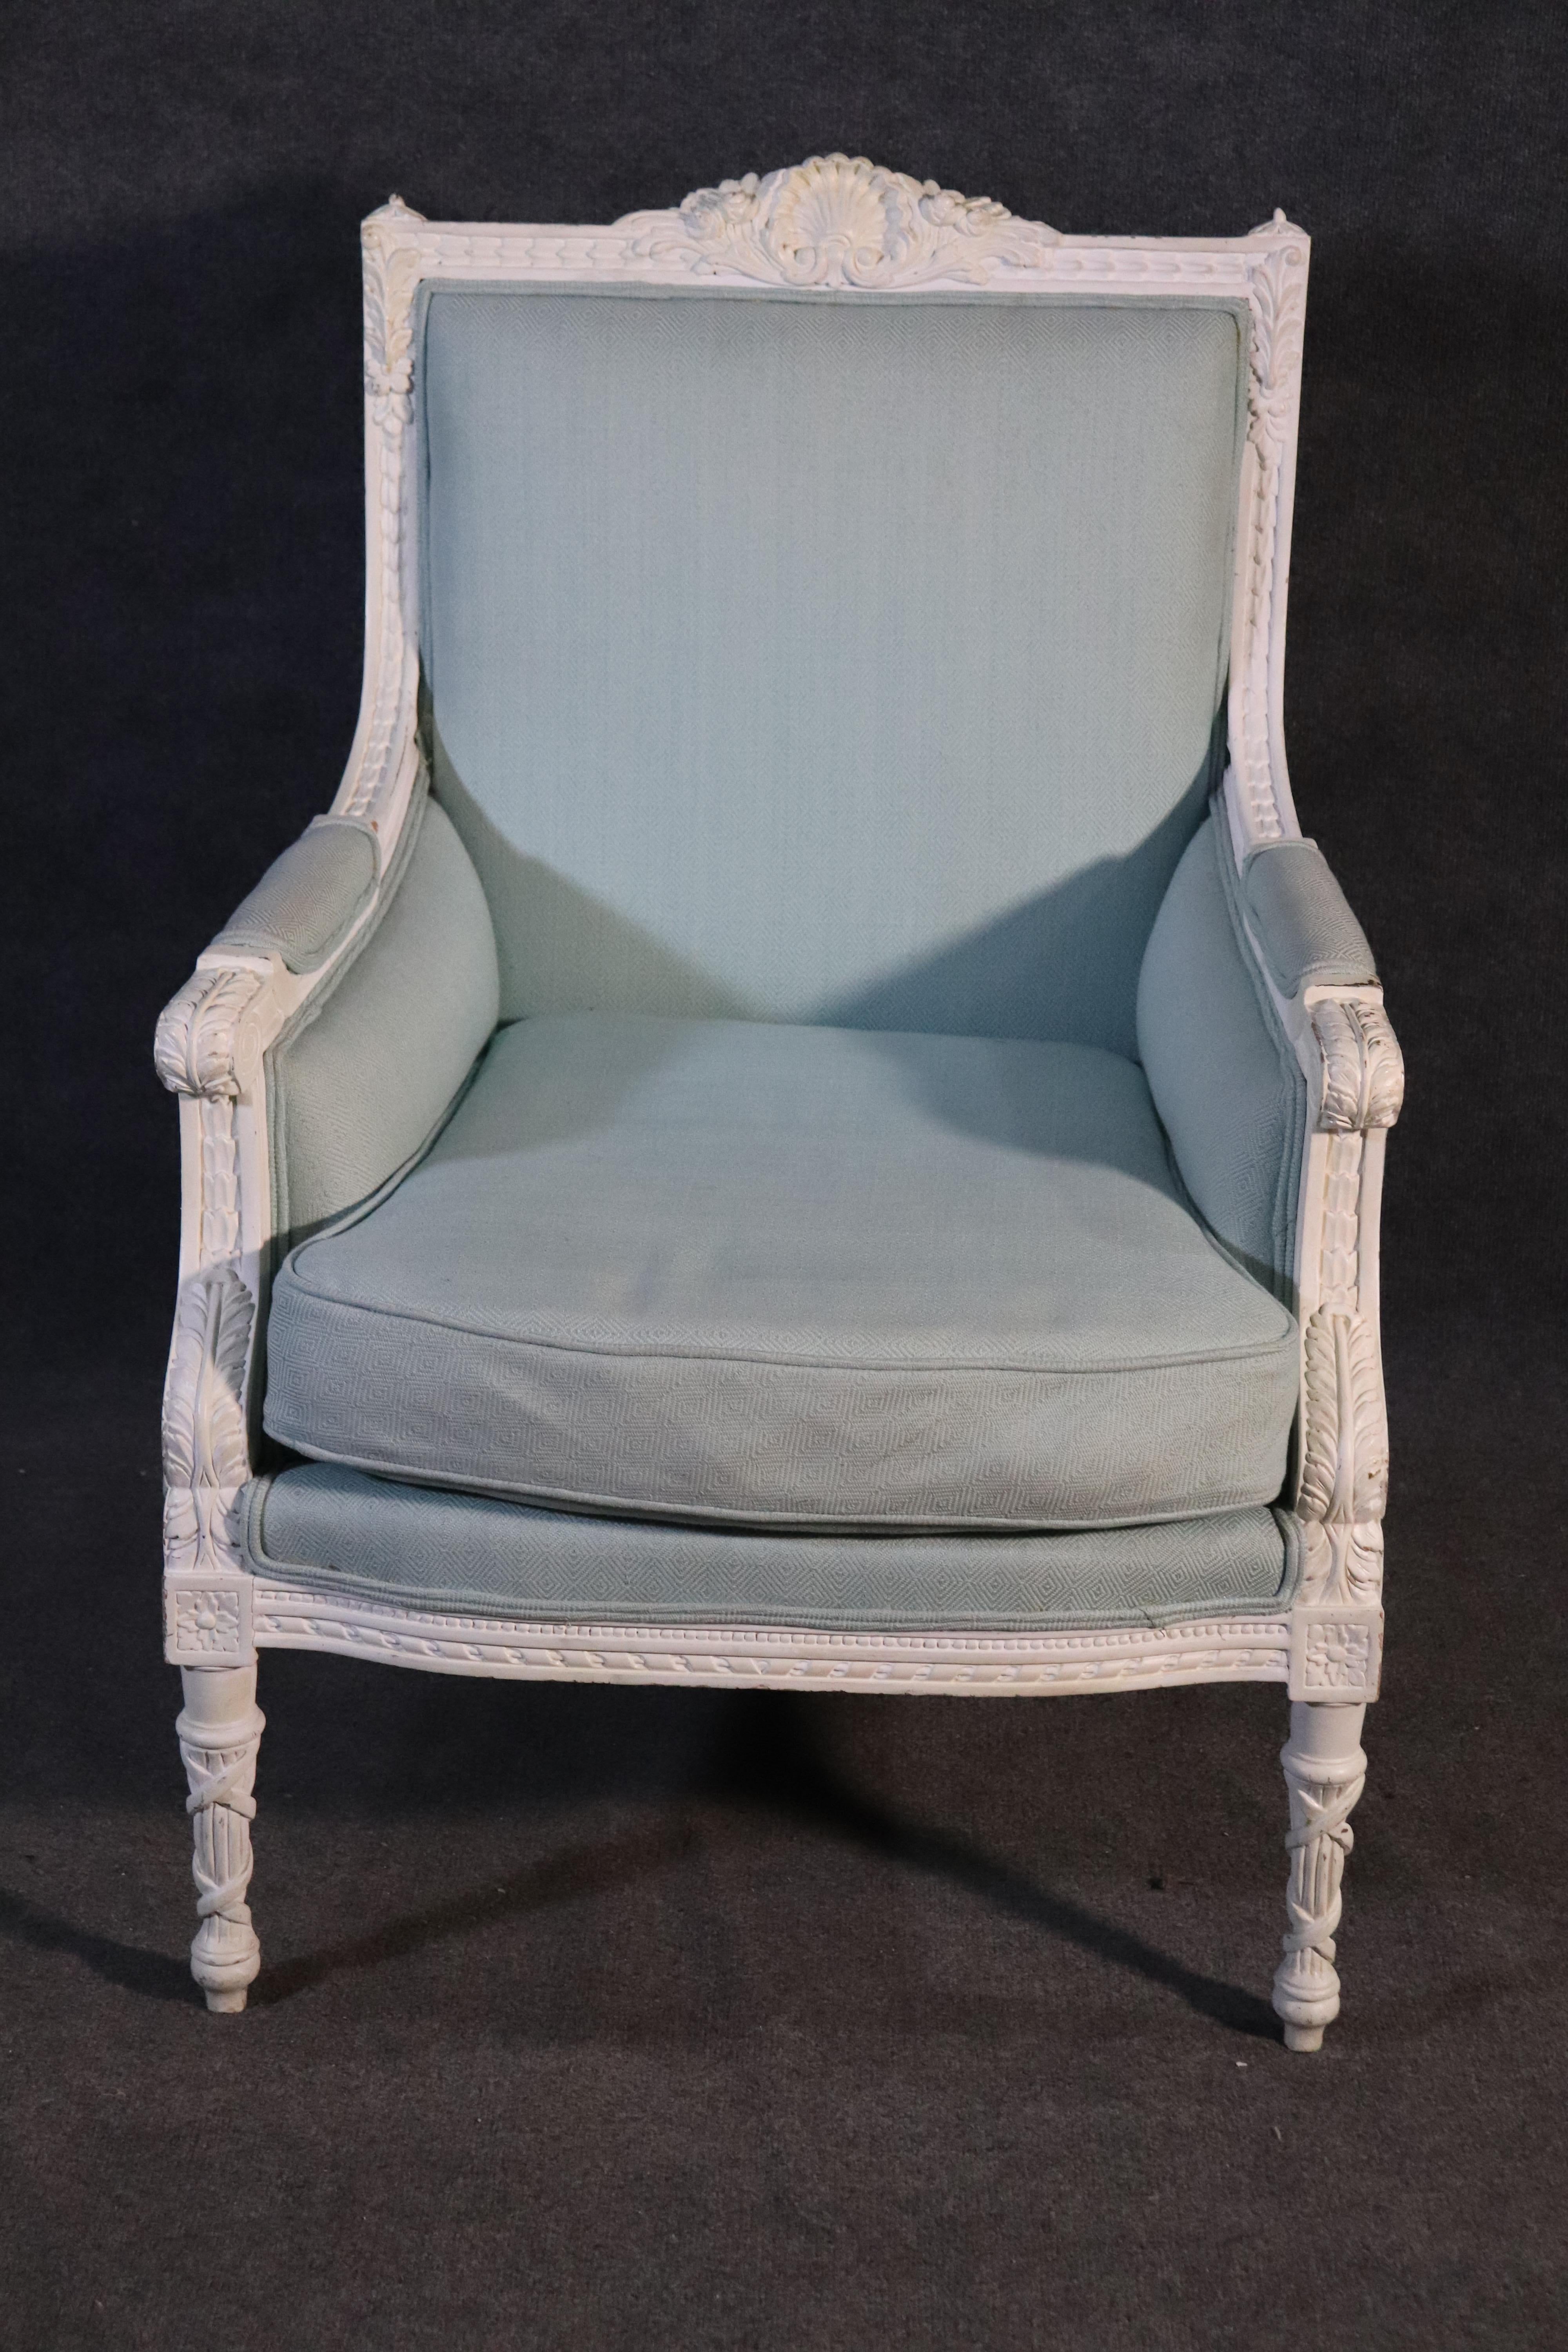 This is a beautiful blue and white French Louis XVI bergère chair. The chair features gorgeous blue upholstery of high quality and bright white distressed painting on the frame. The chair make a great first impression and is cheerful and bright. The